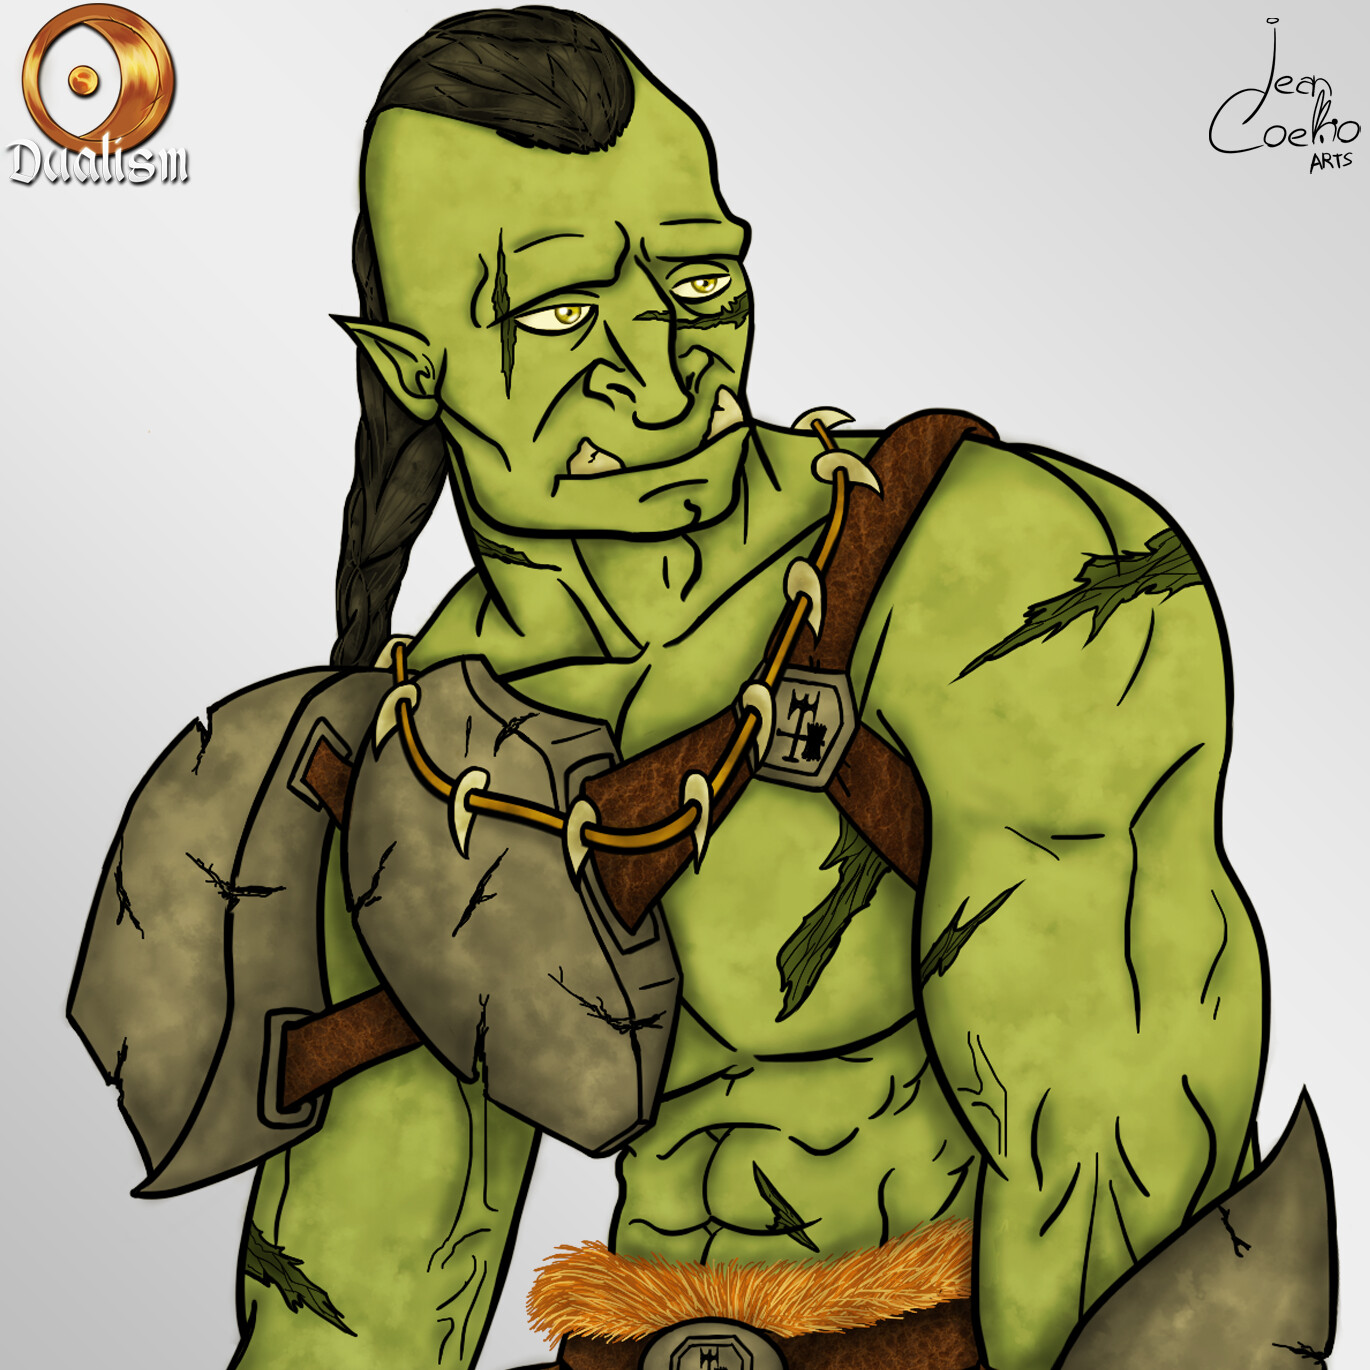 ART] Half-Orc Wildcard can be trusted to break doors : r/DnD